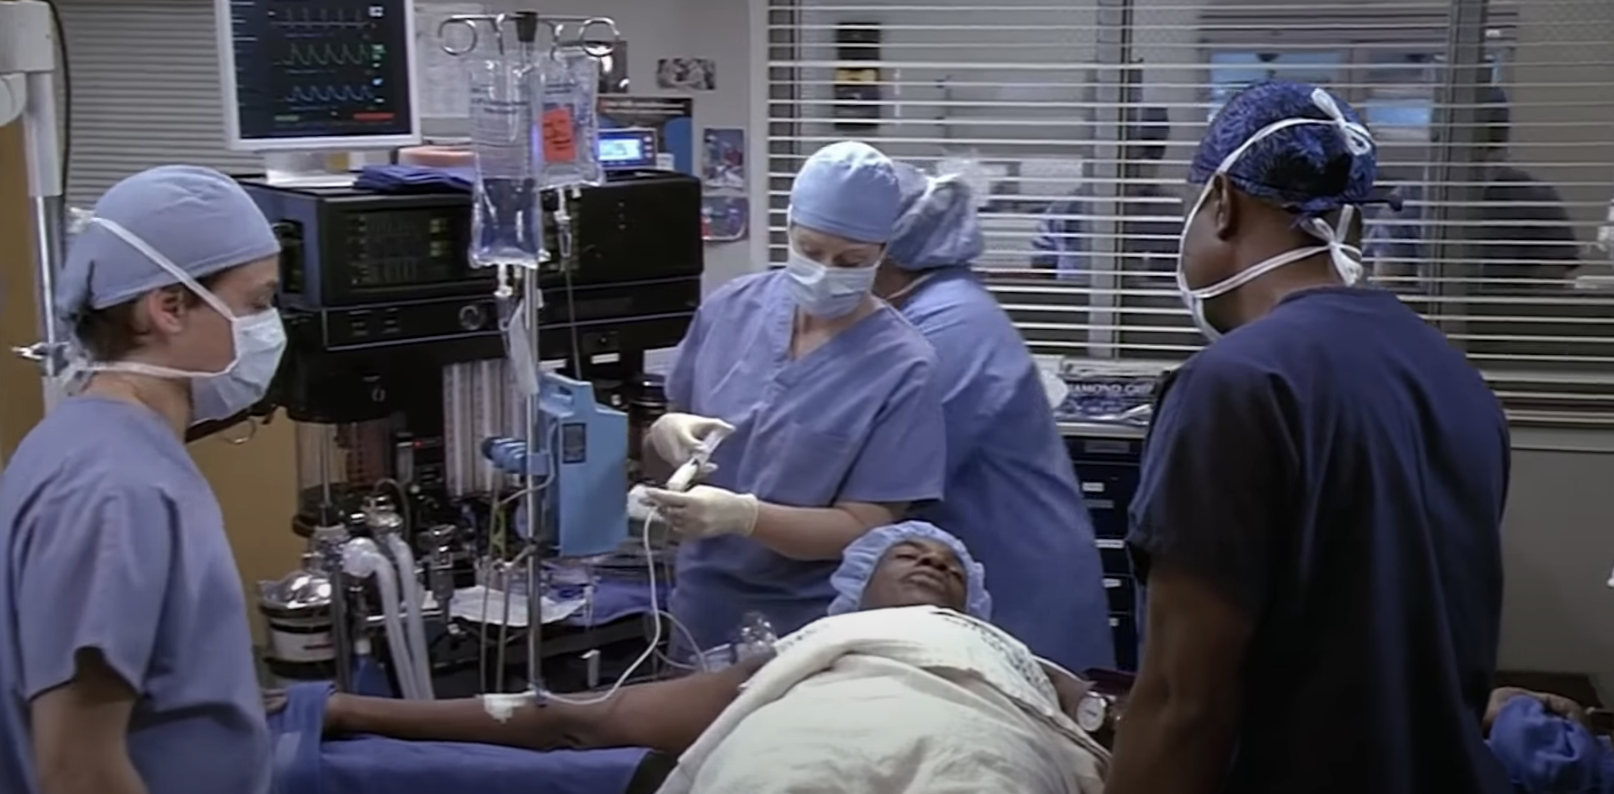 Medical team in scrubs performing surgery on a patient in an operating room